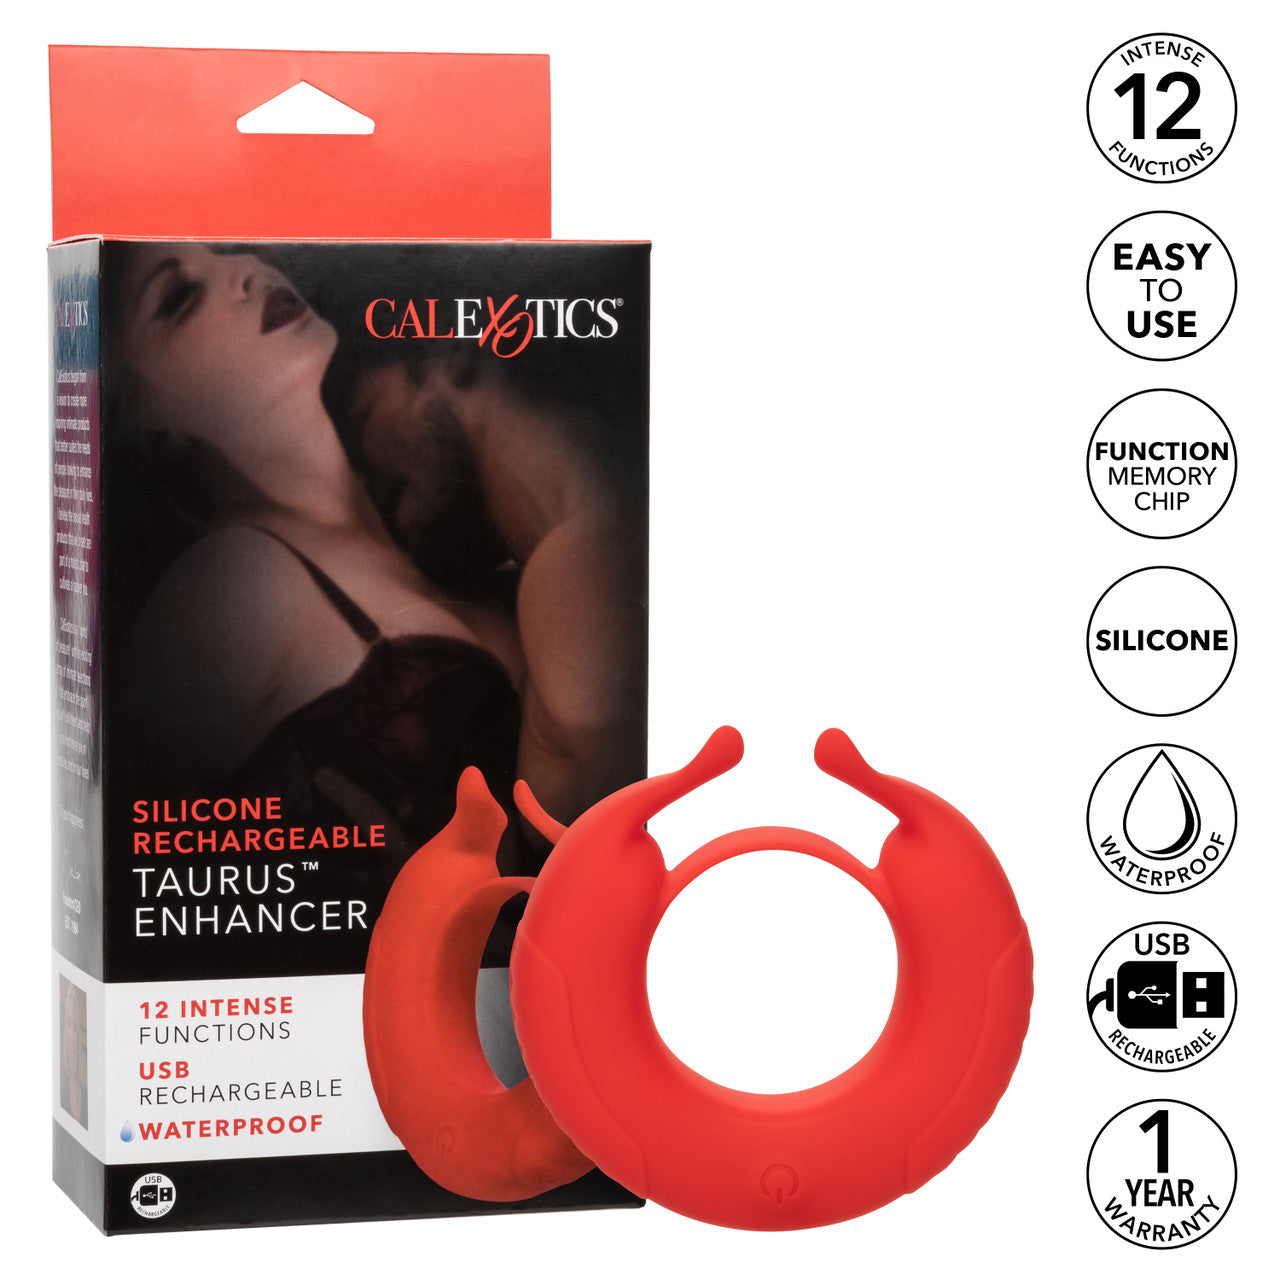 Silicone Rechargeable Taurus Enhancer - Thorn & Feather Sex Toy Canada